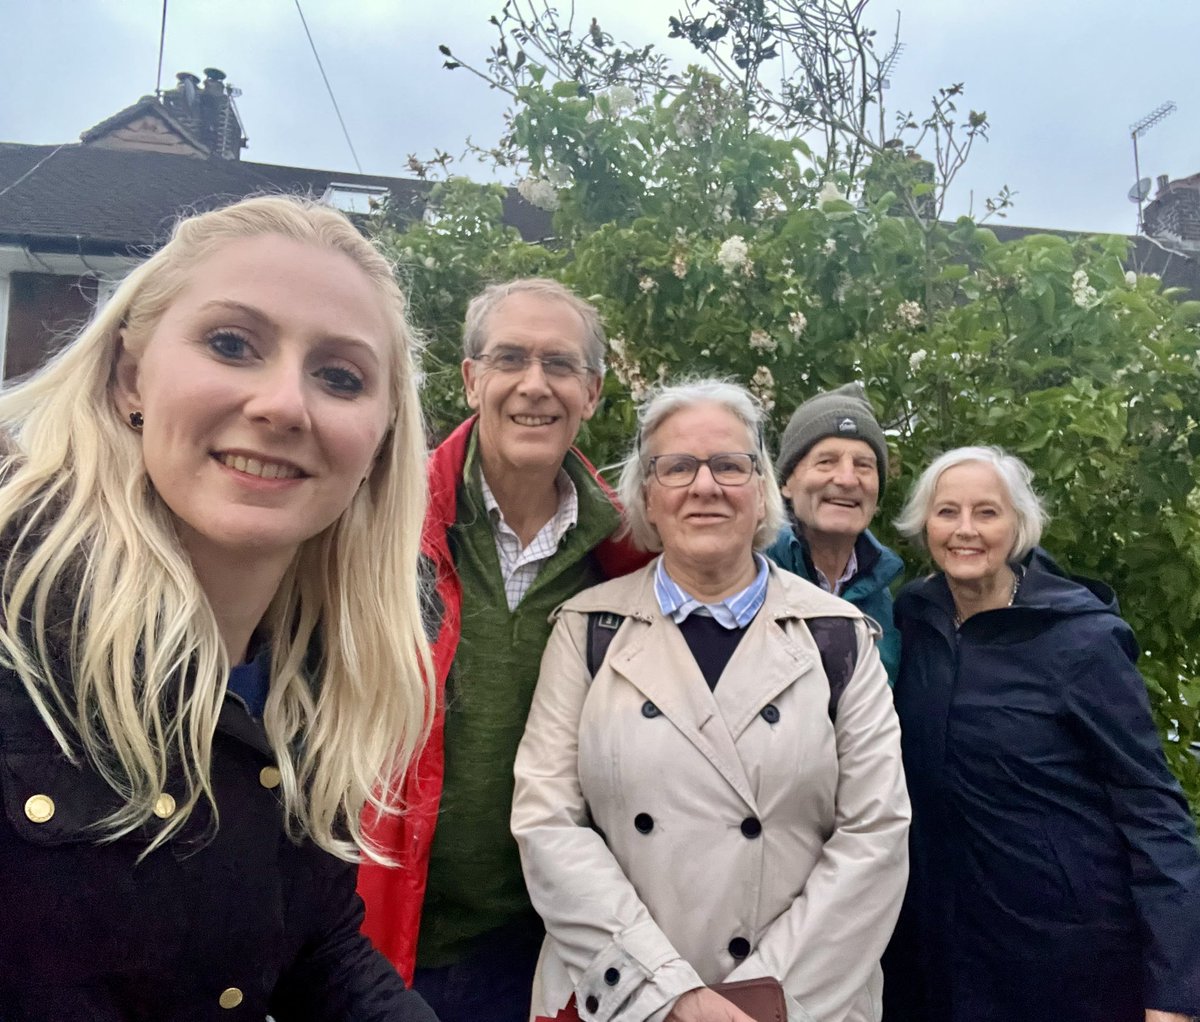 Thank you to all of the brilliant residents in my home ward, Lower Morden, where I am a Councillor, who voted for me and Susan Hall today! It was wonderful to speak to many of you this evening. @MertonTories